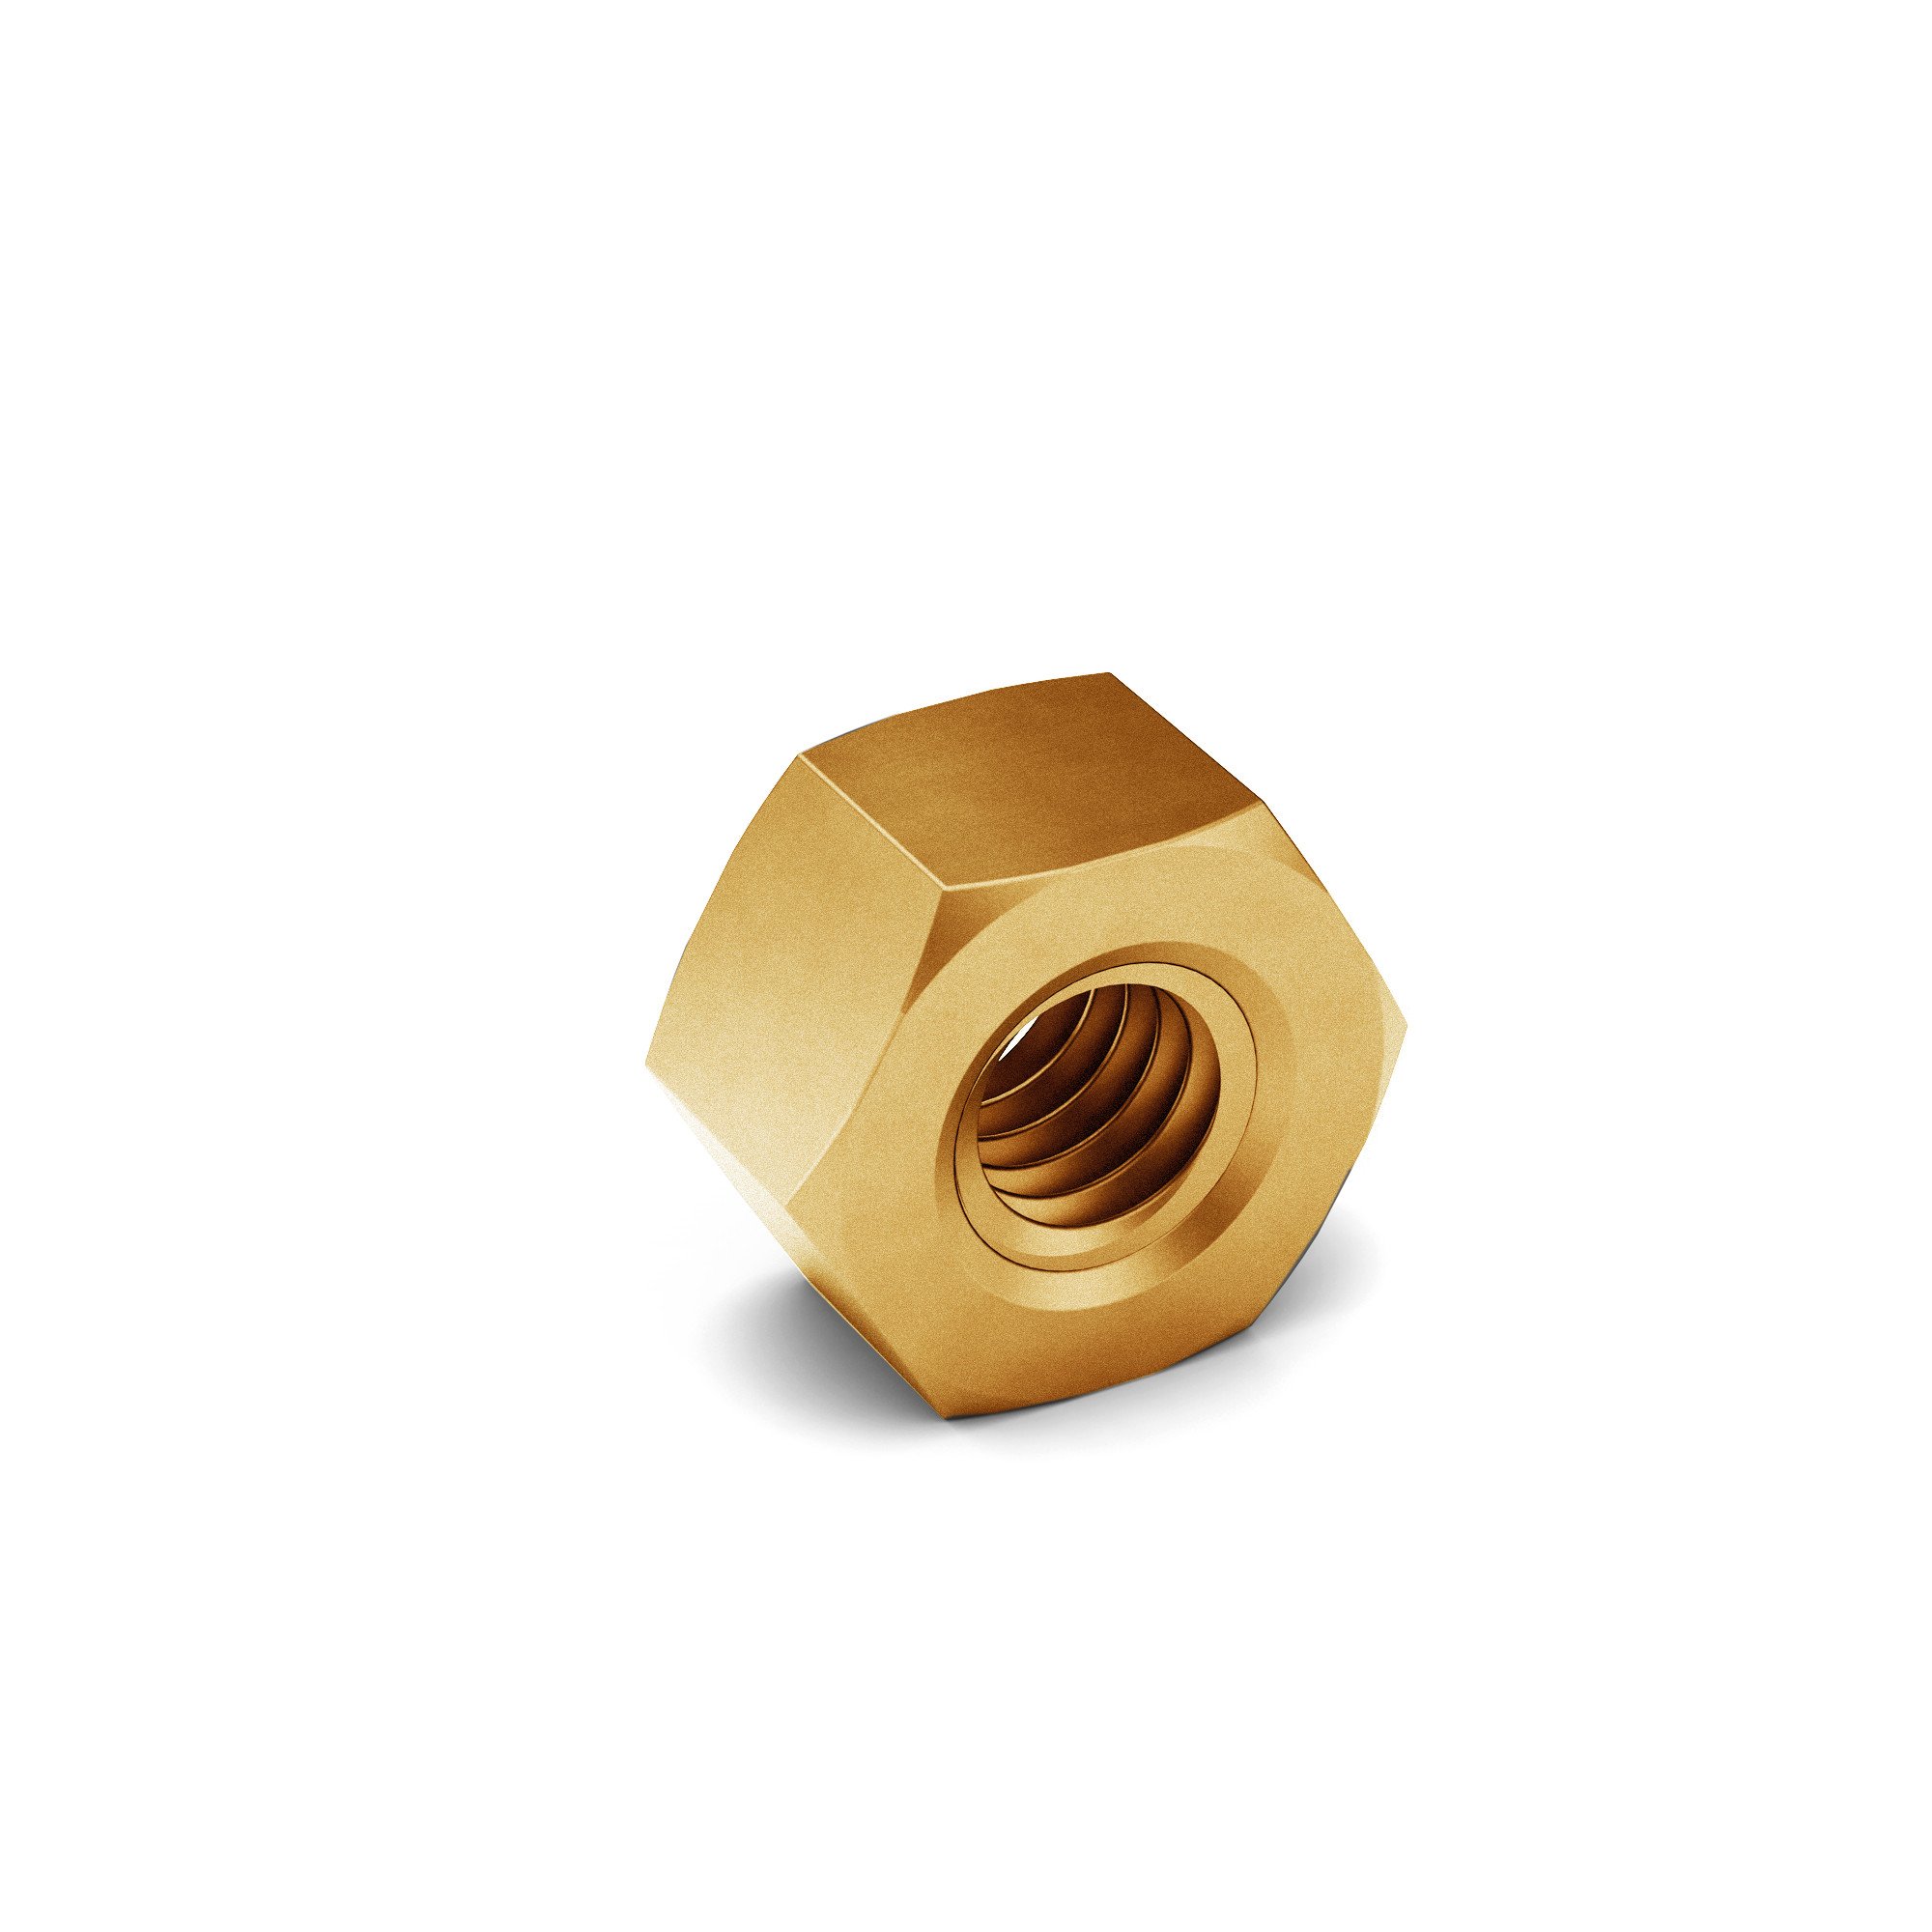 1/4-28 J995 GR 8 Hex Nut Zinc Yellow Made in USA